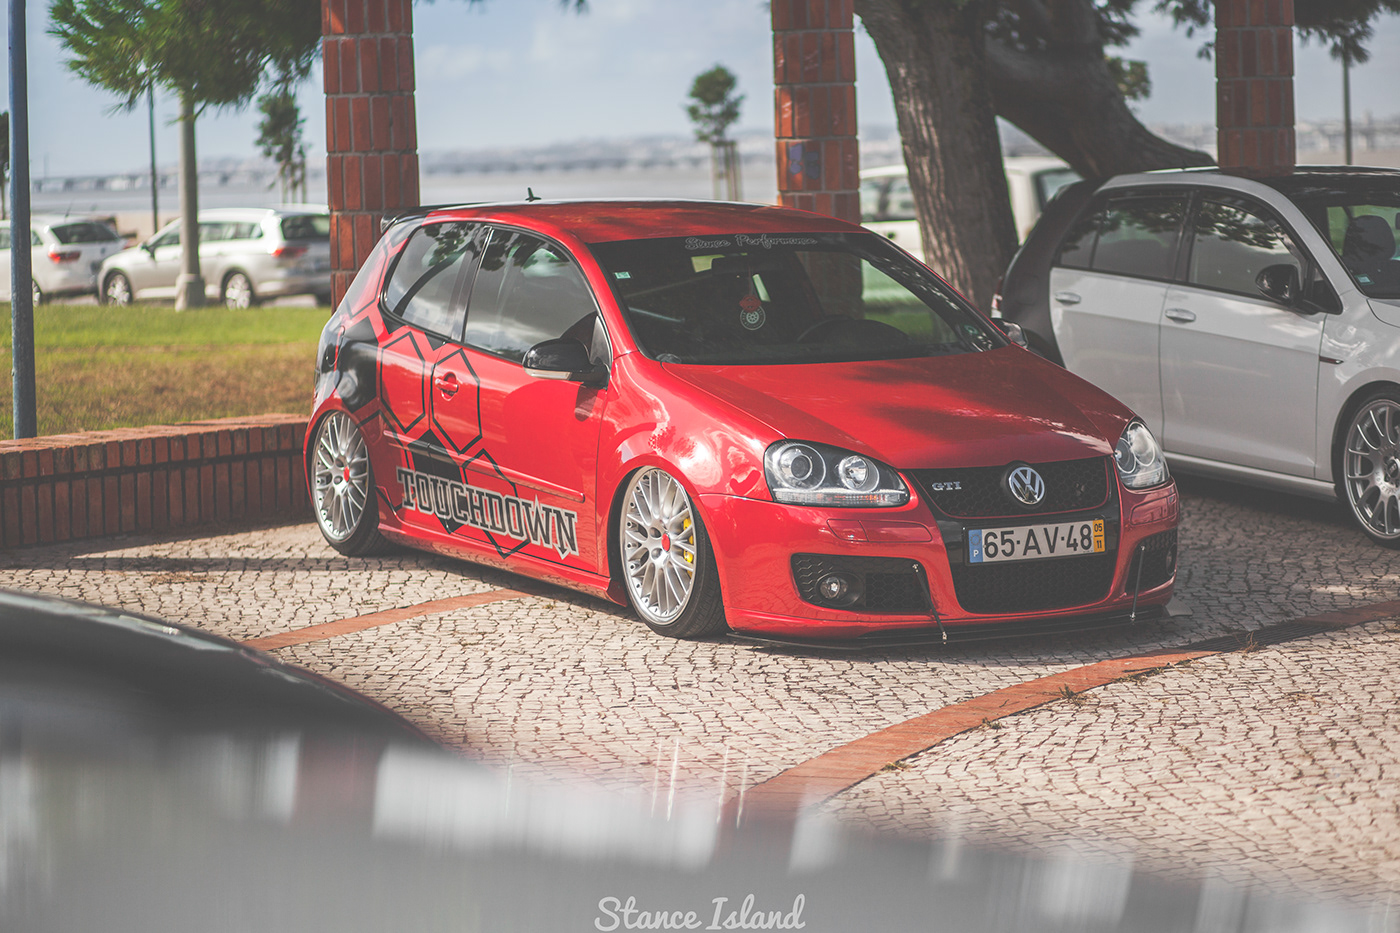 stance stance event portugal stance static Alcochete air lift air lift portugal stance island air suspension